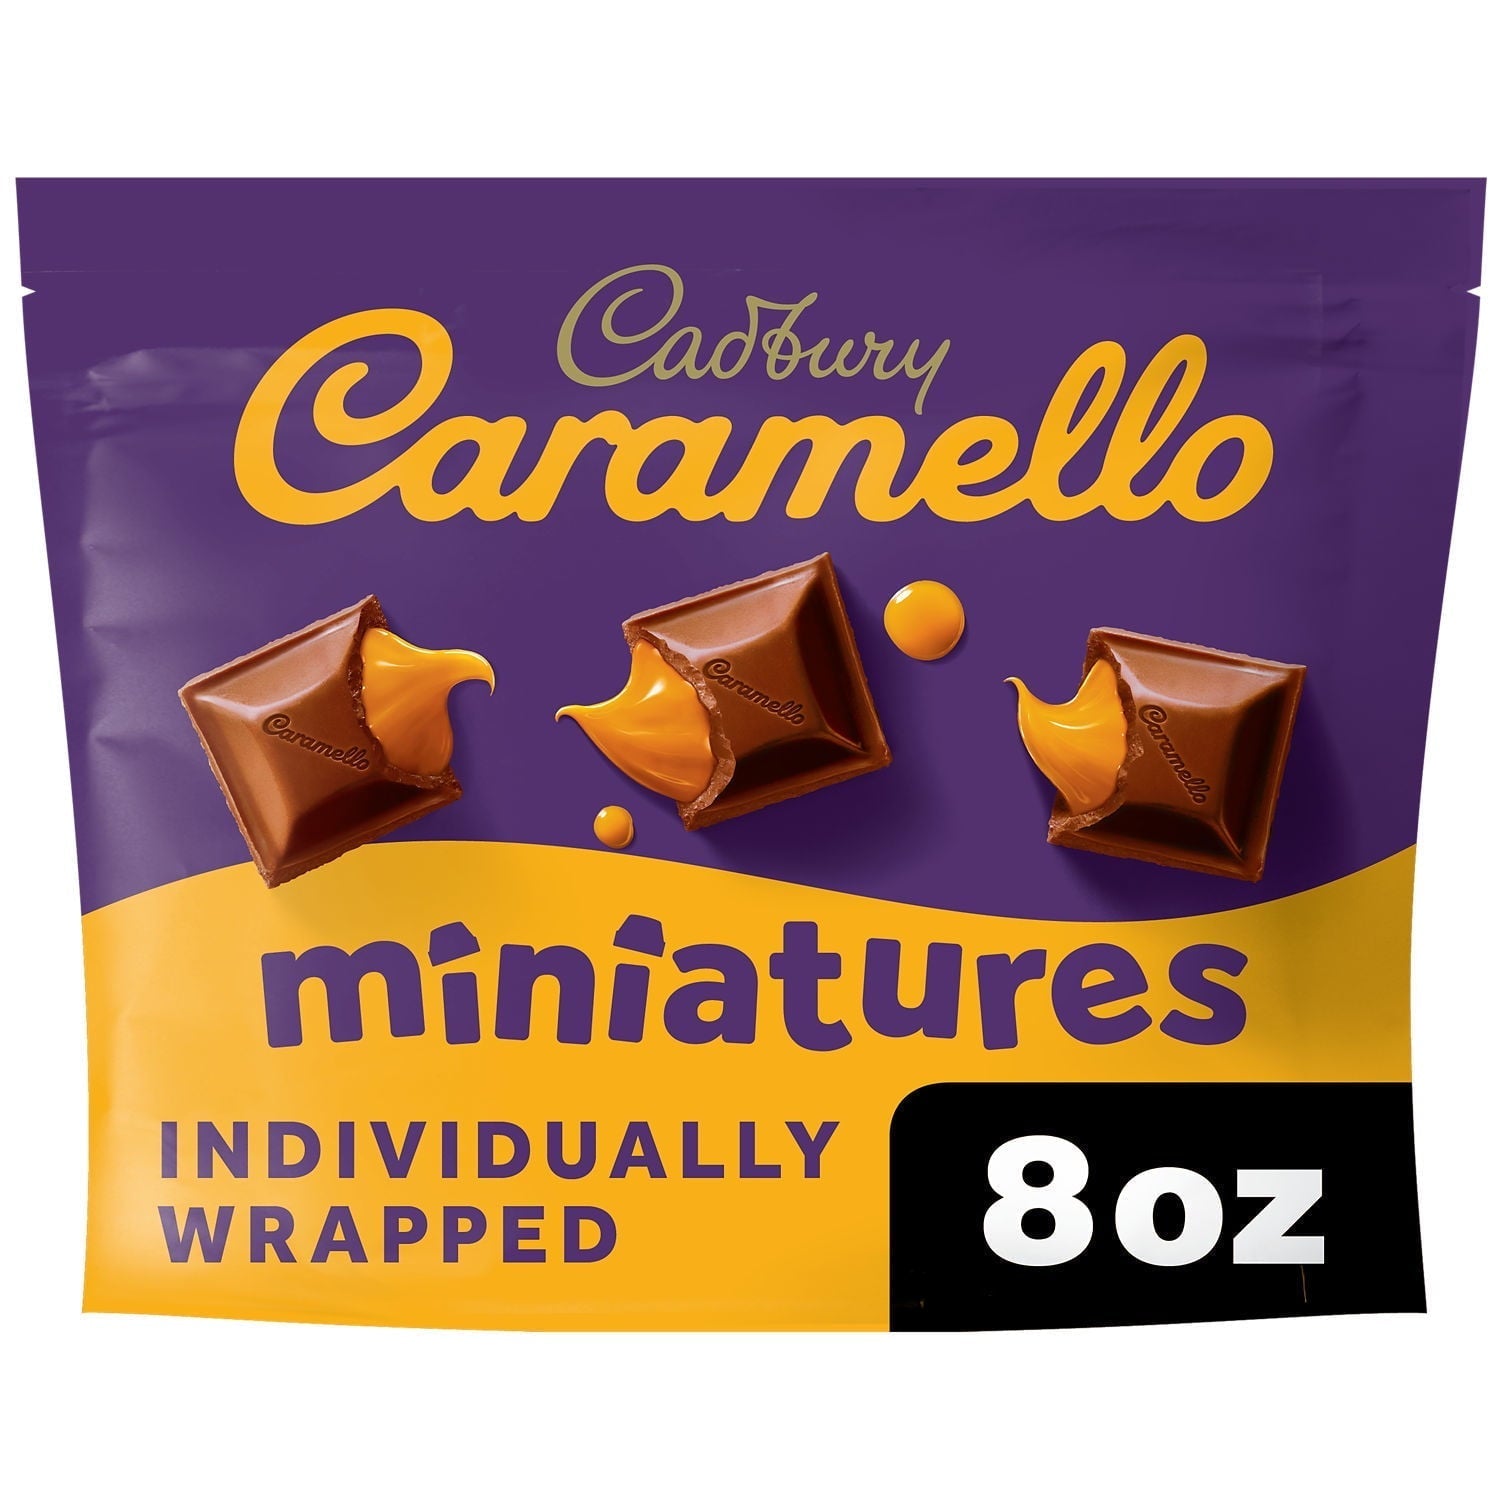 Wholesale prices with free shipping all over United States Cadbury Caramello Miniatures Milk Chocolate and Caramel Candy, Share Pack 8 oz - Steven Deals